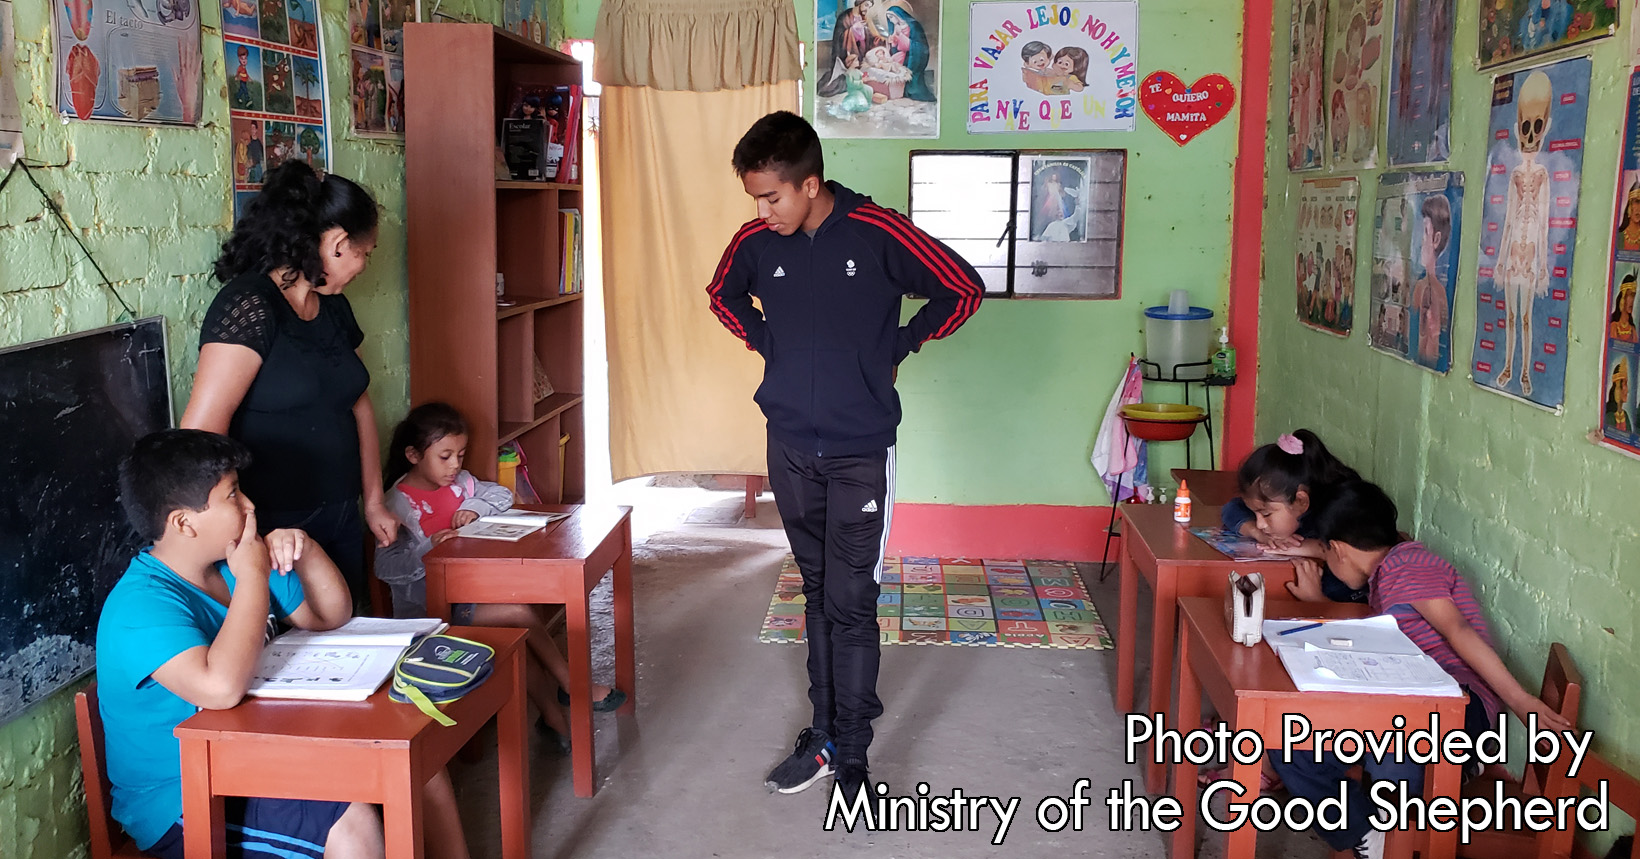 Five young kids are attending one of their study sessions in a Child Care Center. To make sure that they do not fall behind, the kids regularly go back over their notes.